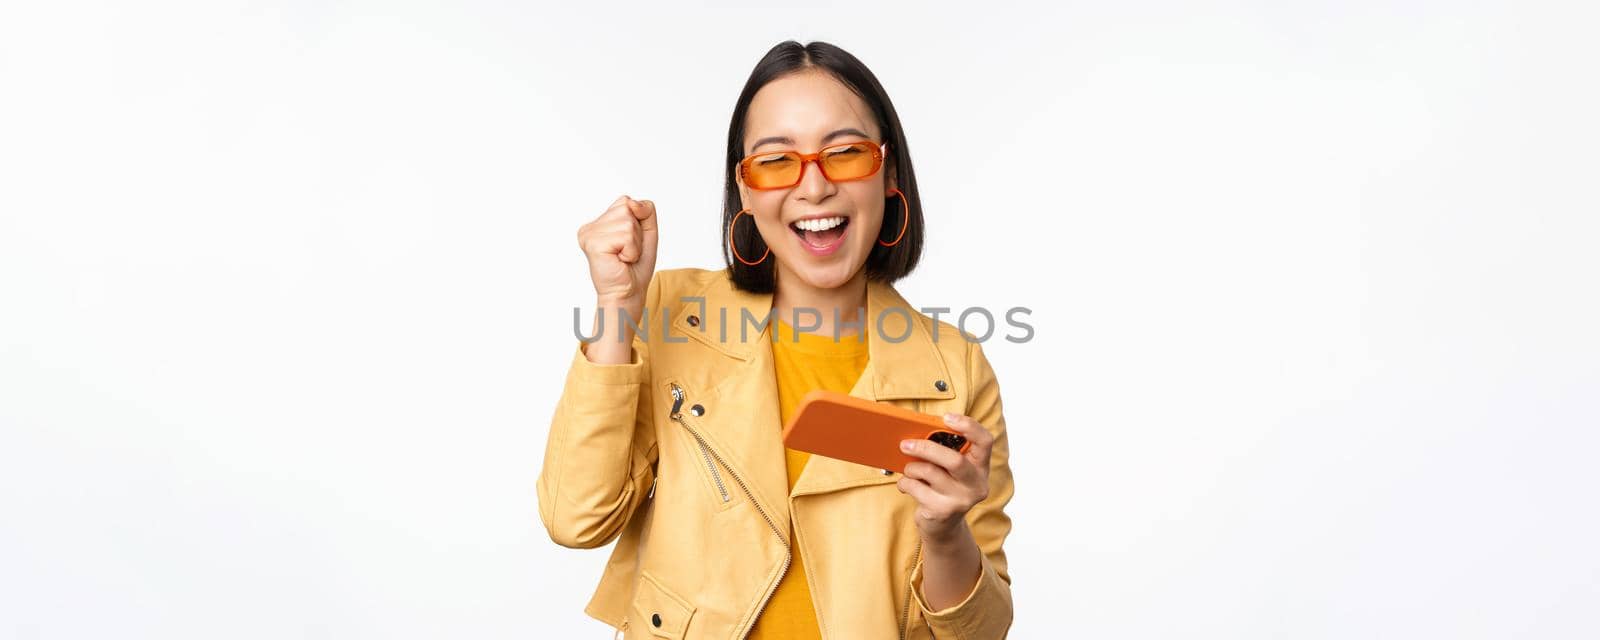 Image of stylish korean girl dancing with smartphone, laughing happy and smiling, standing over white background. Copy space